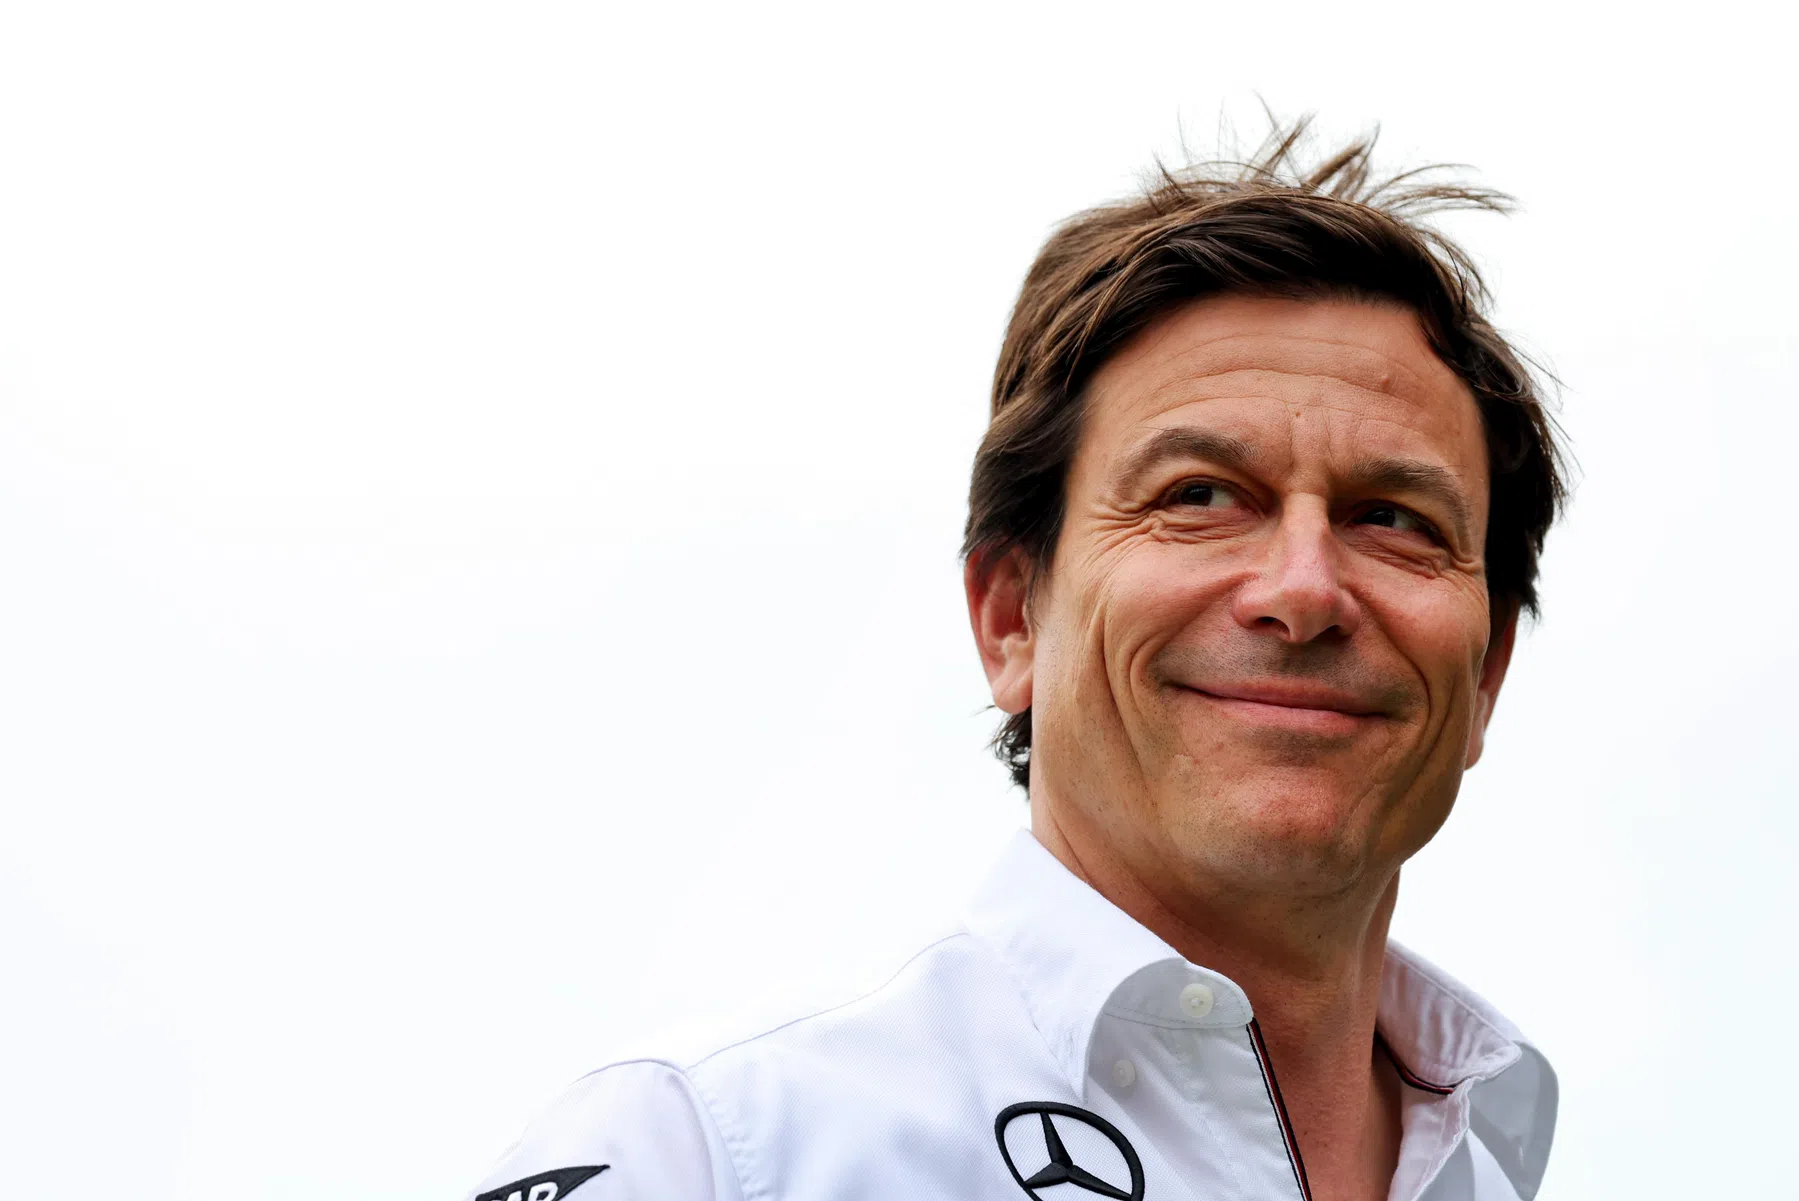 Wolff laughs at silly comment from Horner